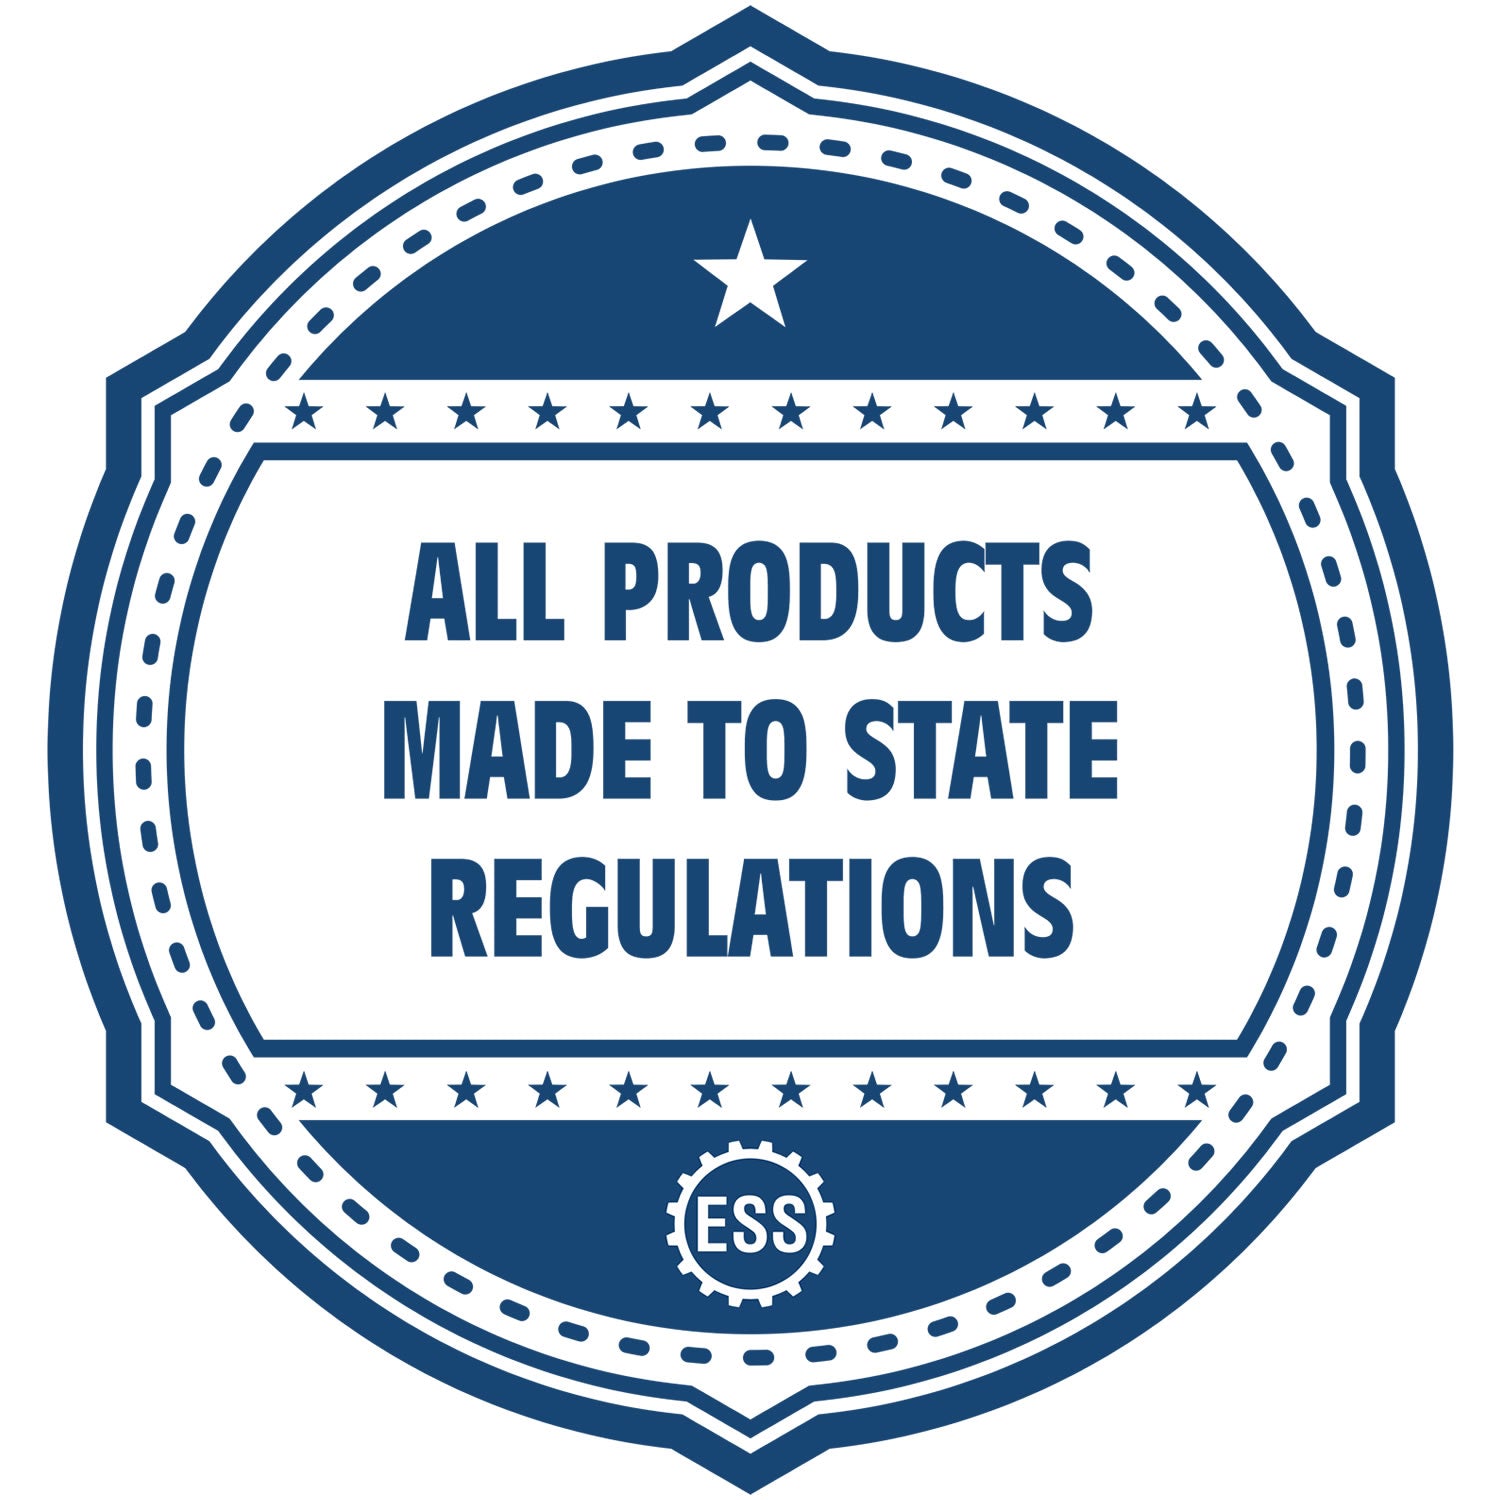 An icon or badge element for the State of Connecticut Extended Long Reach Landscape Architect Seal Embosser showing that this product is made in compliance with state regulations.